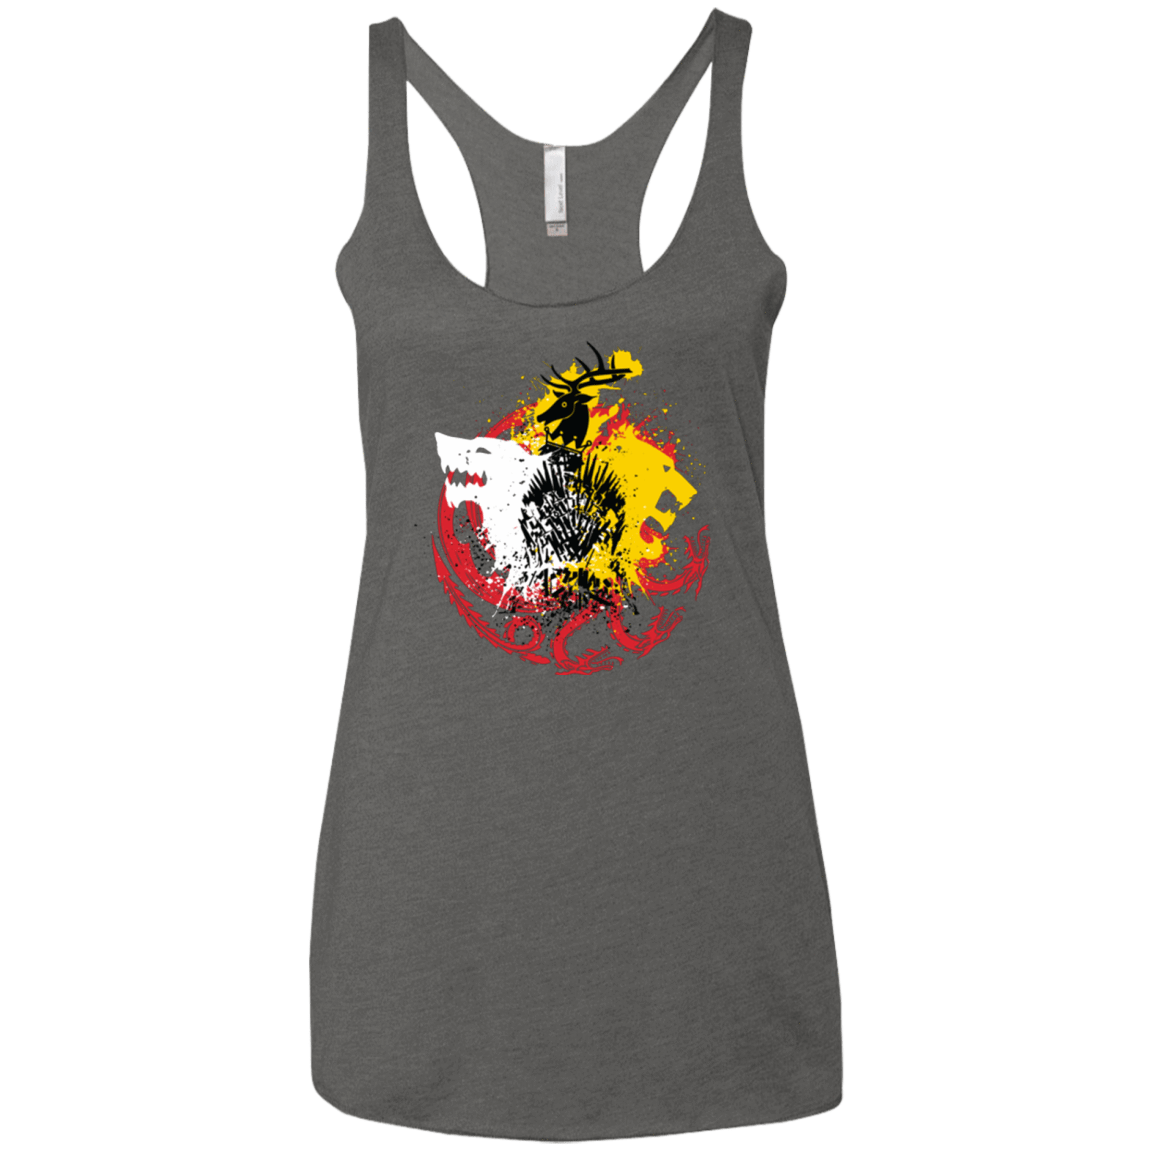 T-Shirts Premium Heather / X-Small GAME OF COLORS Women's Triblend Racerback Tank